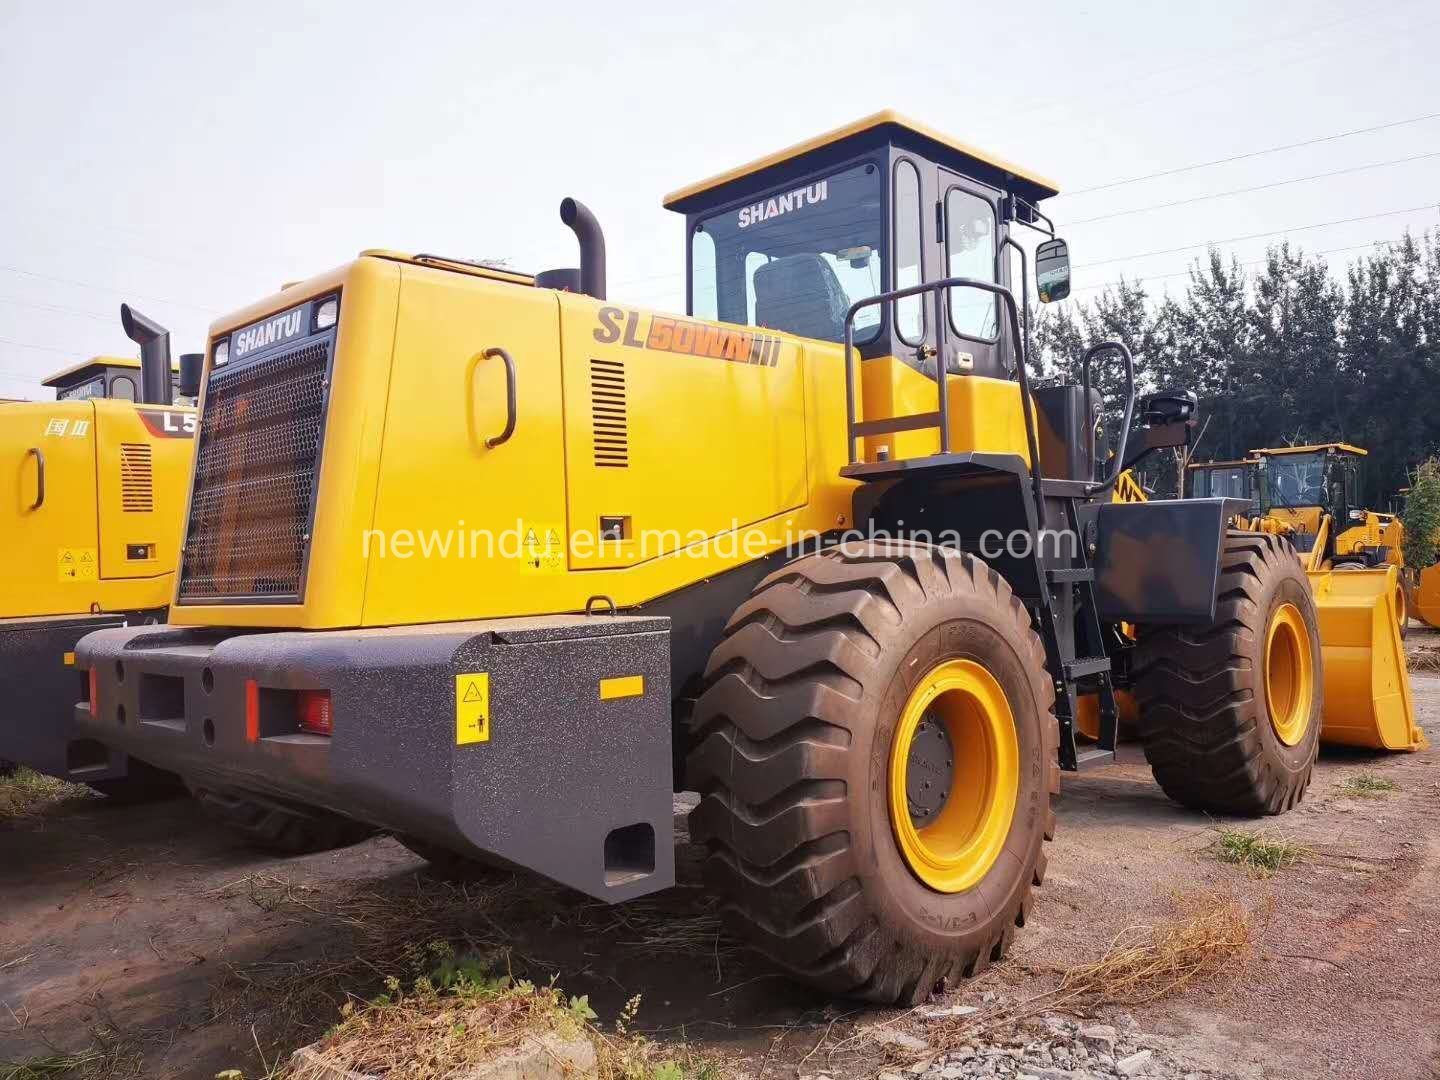 Shantui Brand New SL50wn 5ton Front End Loader Price